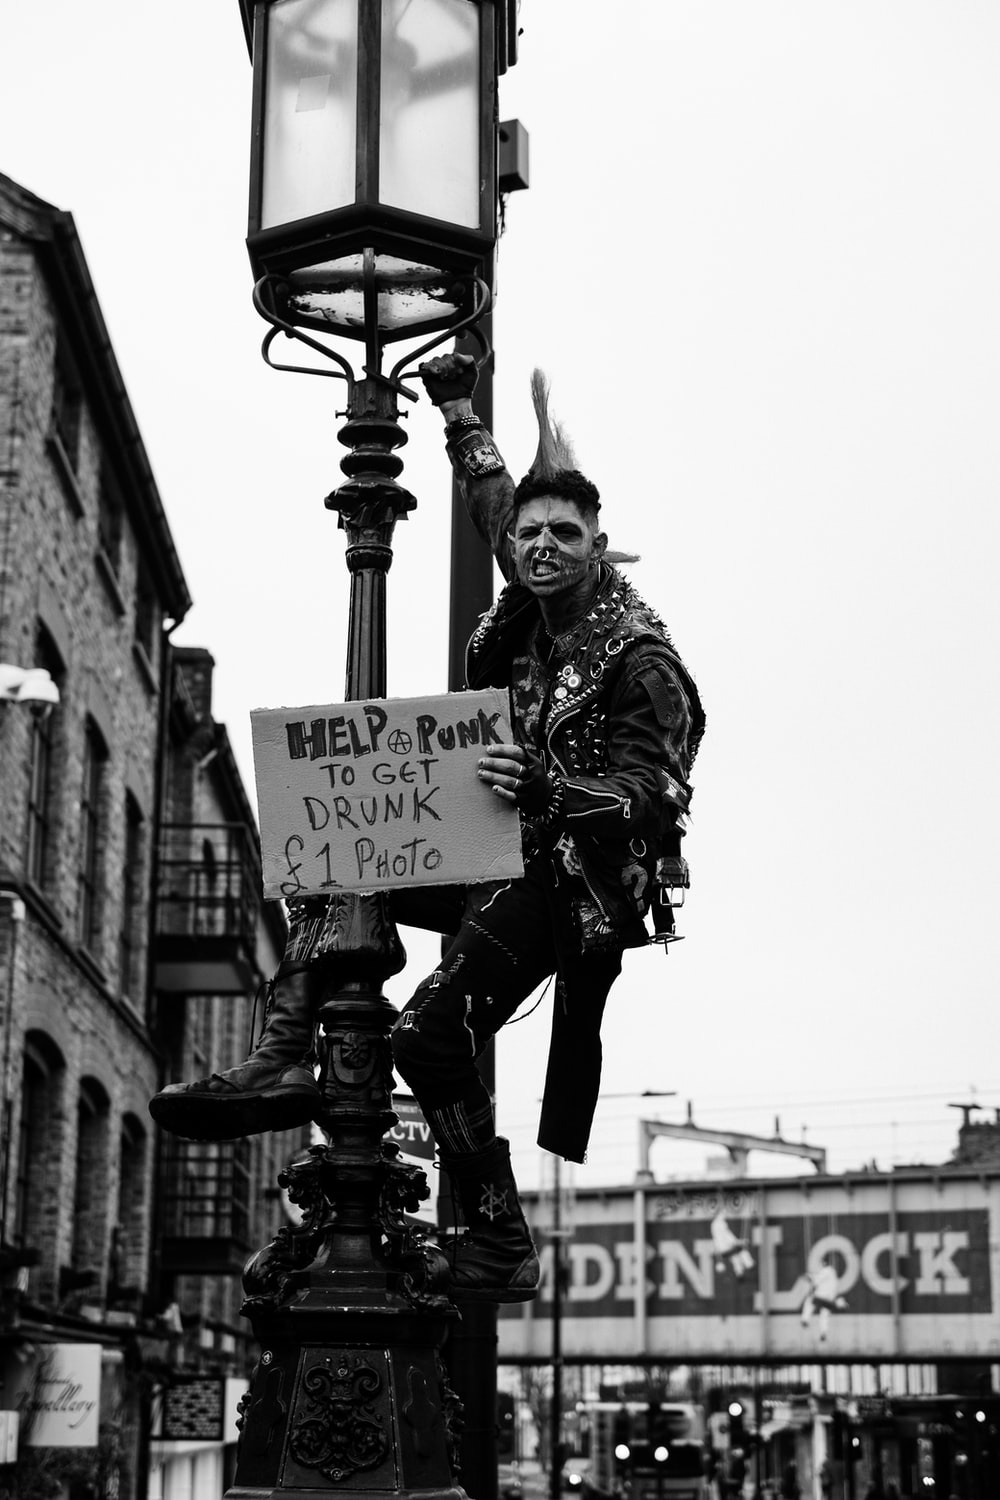 A man dressed as a punk rock monster poses on a lamp post - Punk